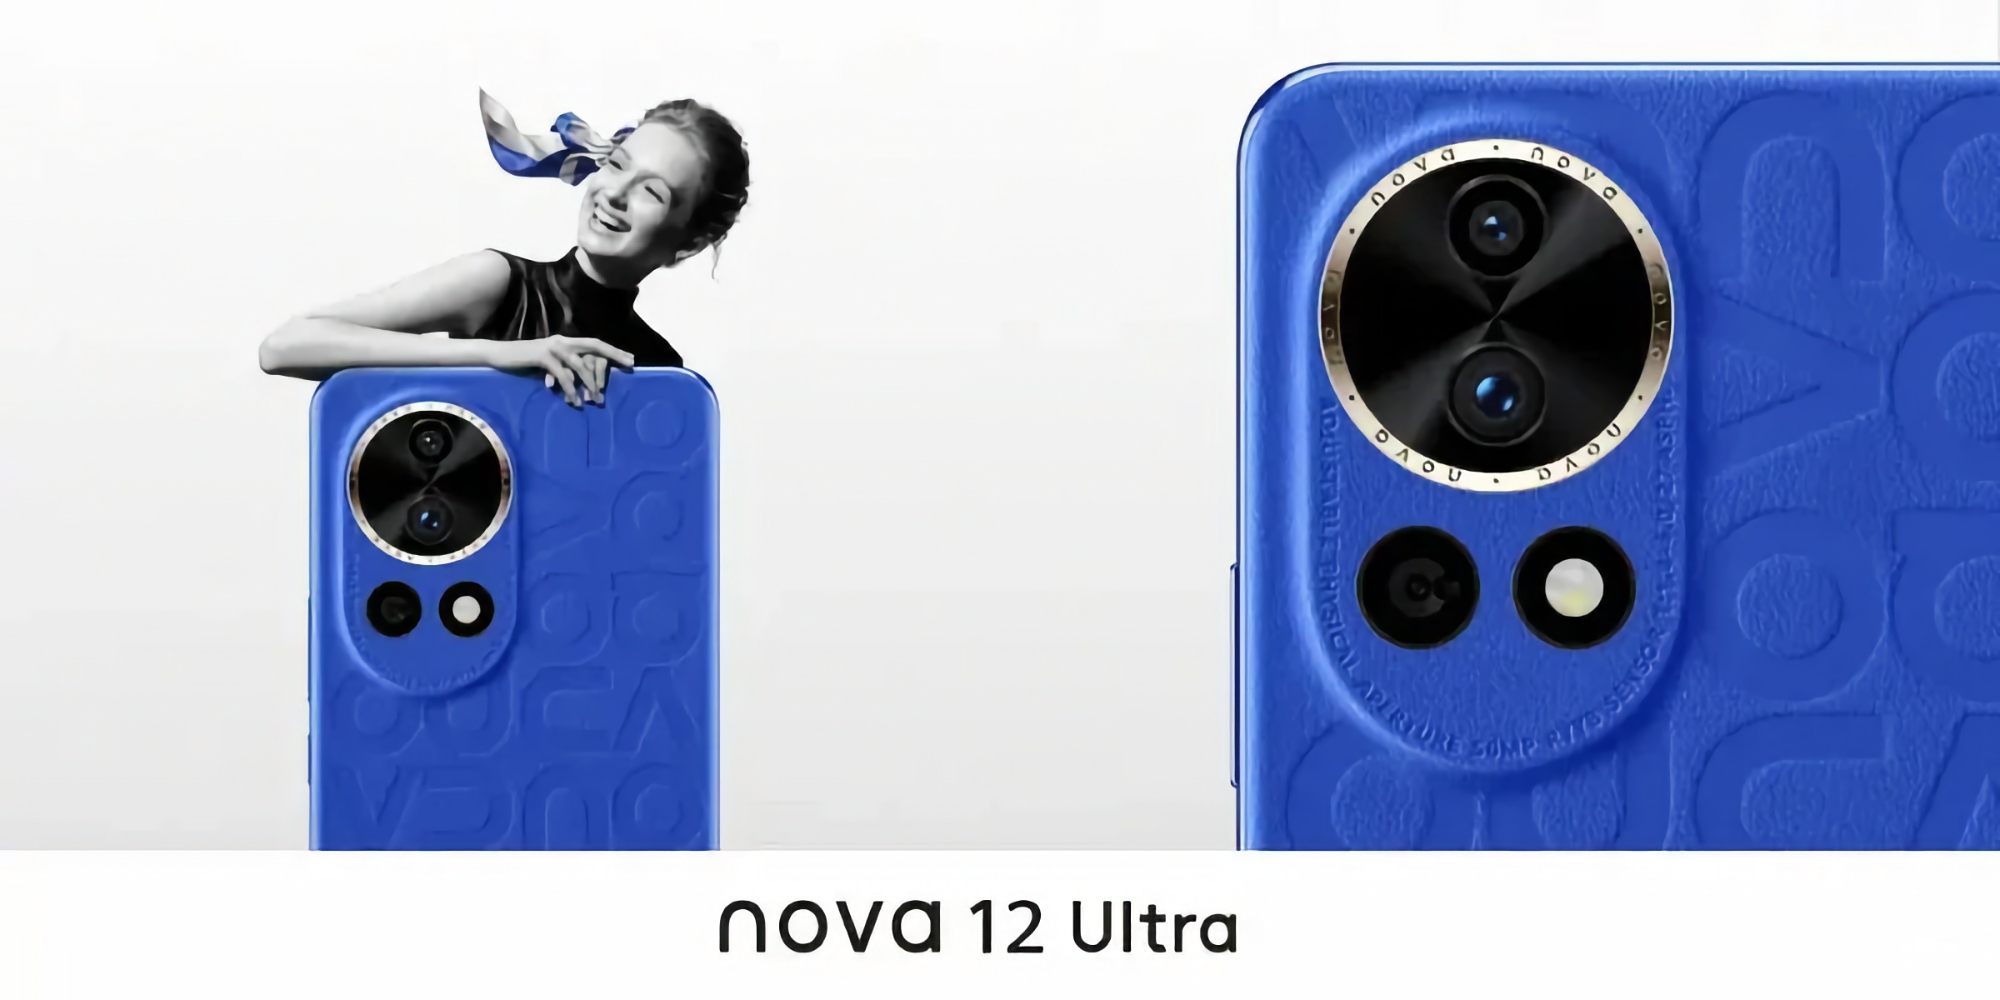 An insider showed the appearance of Huawei Nova 12 Ultra and shared some characteristics of the novelty